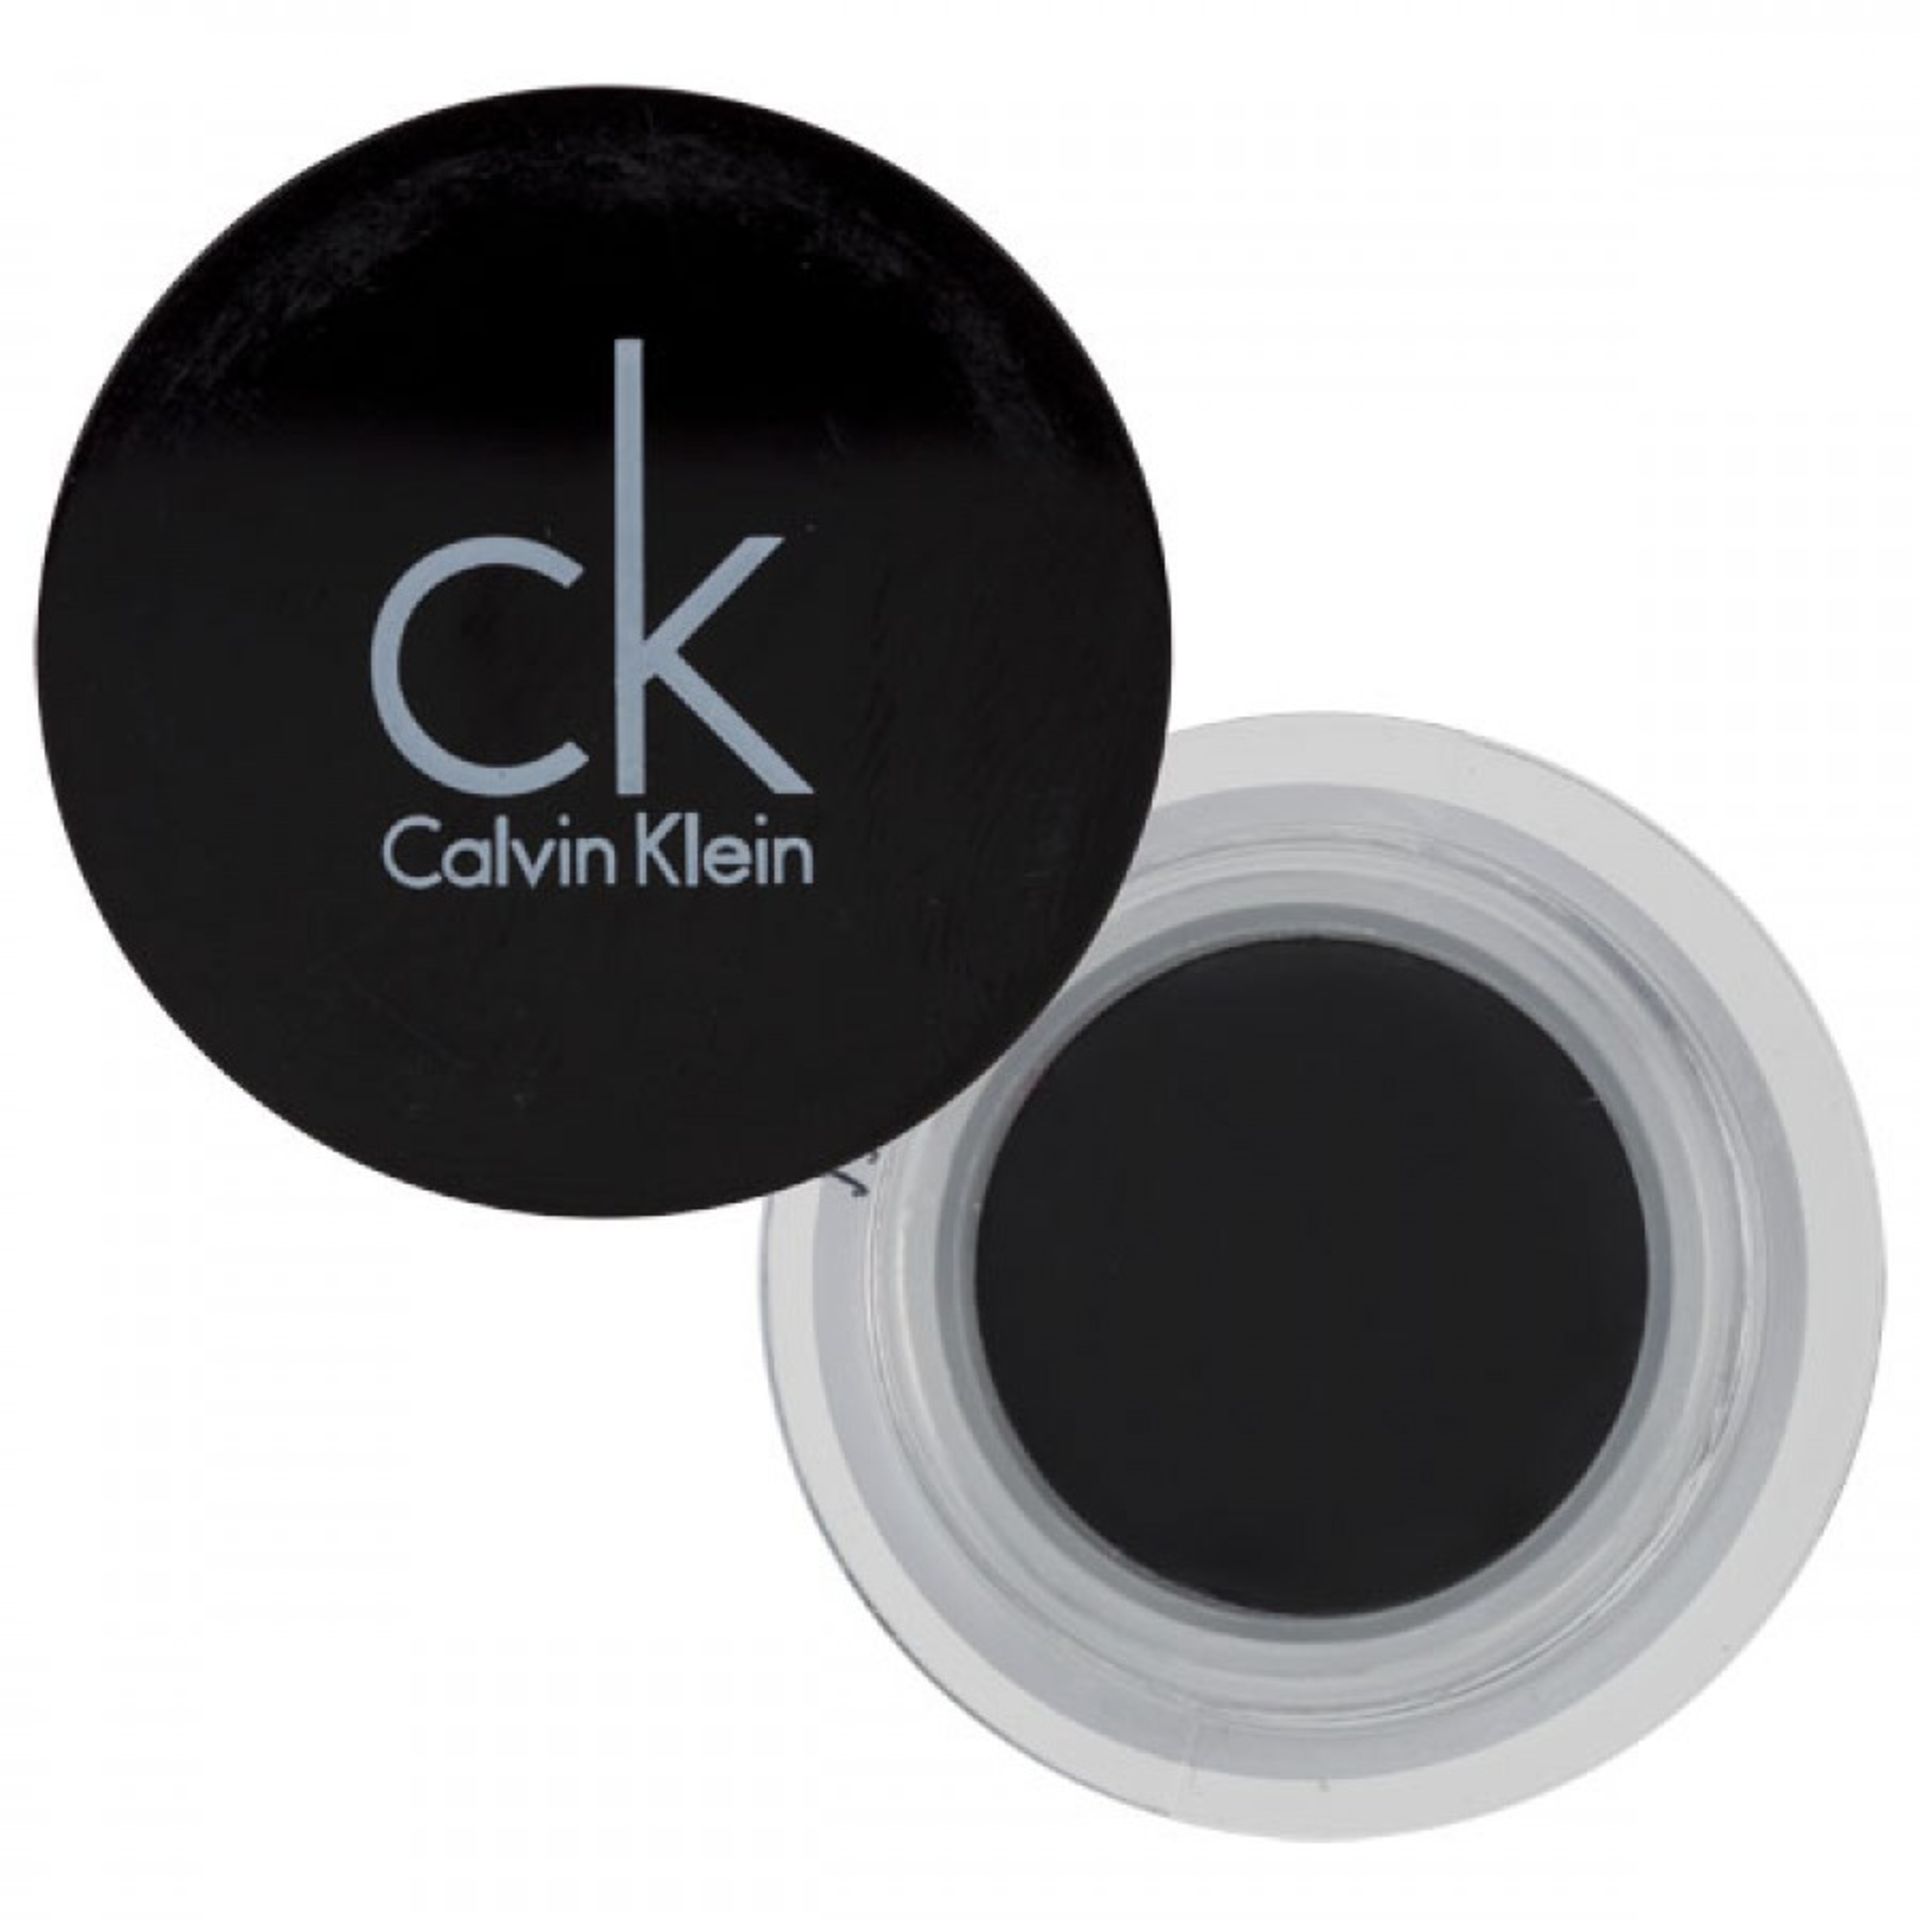 288 x ck Tepting Glimmer Sheer Creme Eyeshadow -1 Shade – NO VAT – UK Delivery £15